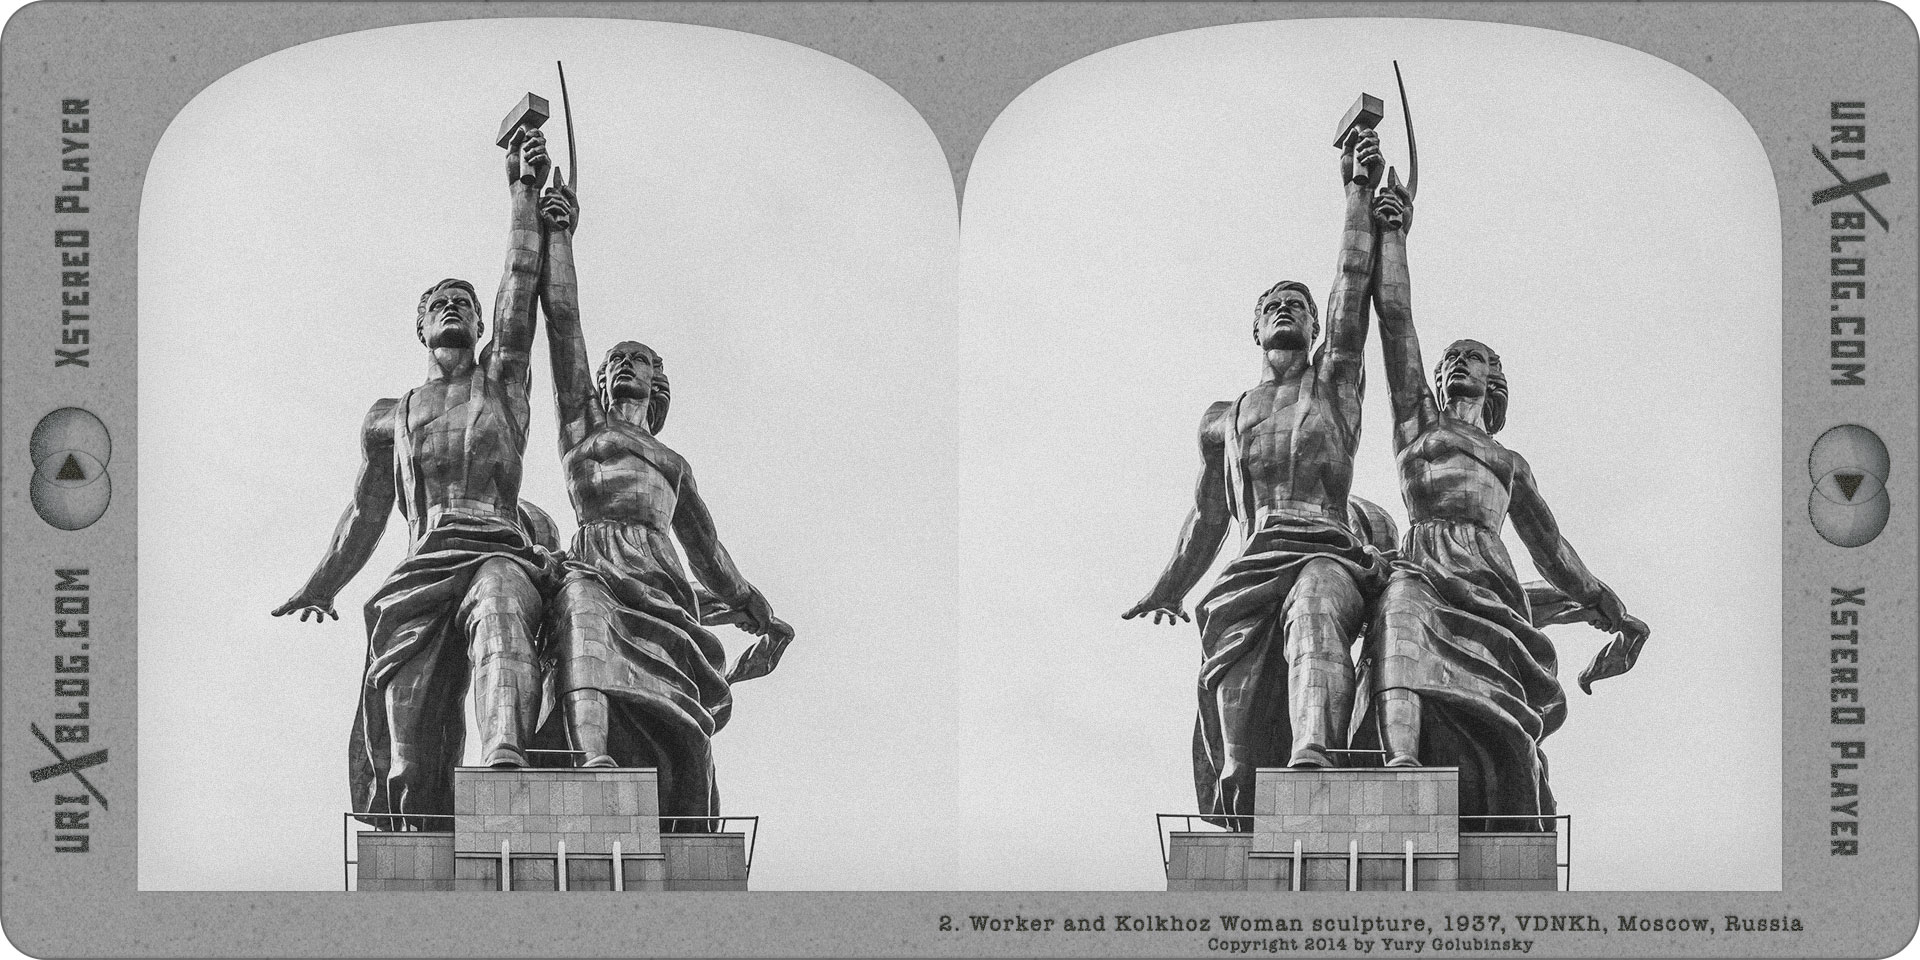 2014, Worker and Kolkhoz Woman, sculpture, statue, monument, museum, exhibition, VDNKh, Moscow, USSR, Russia, Soviet, art, 1937, Paris